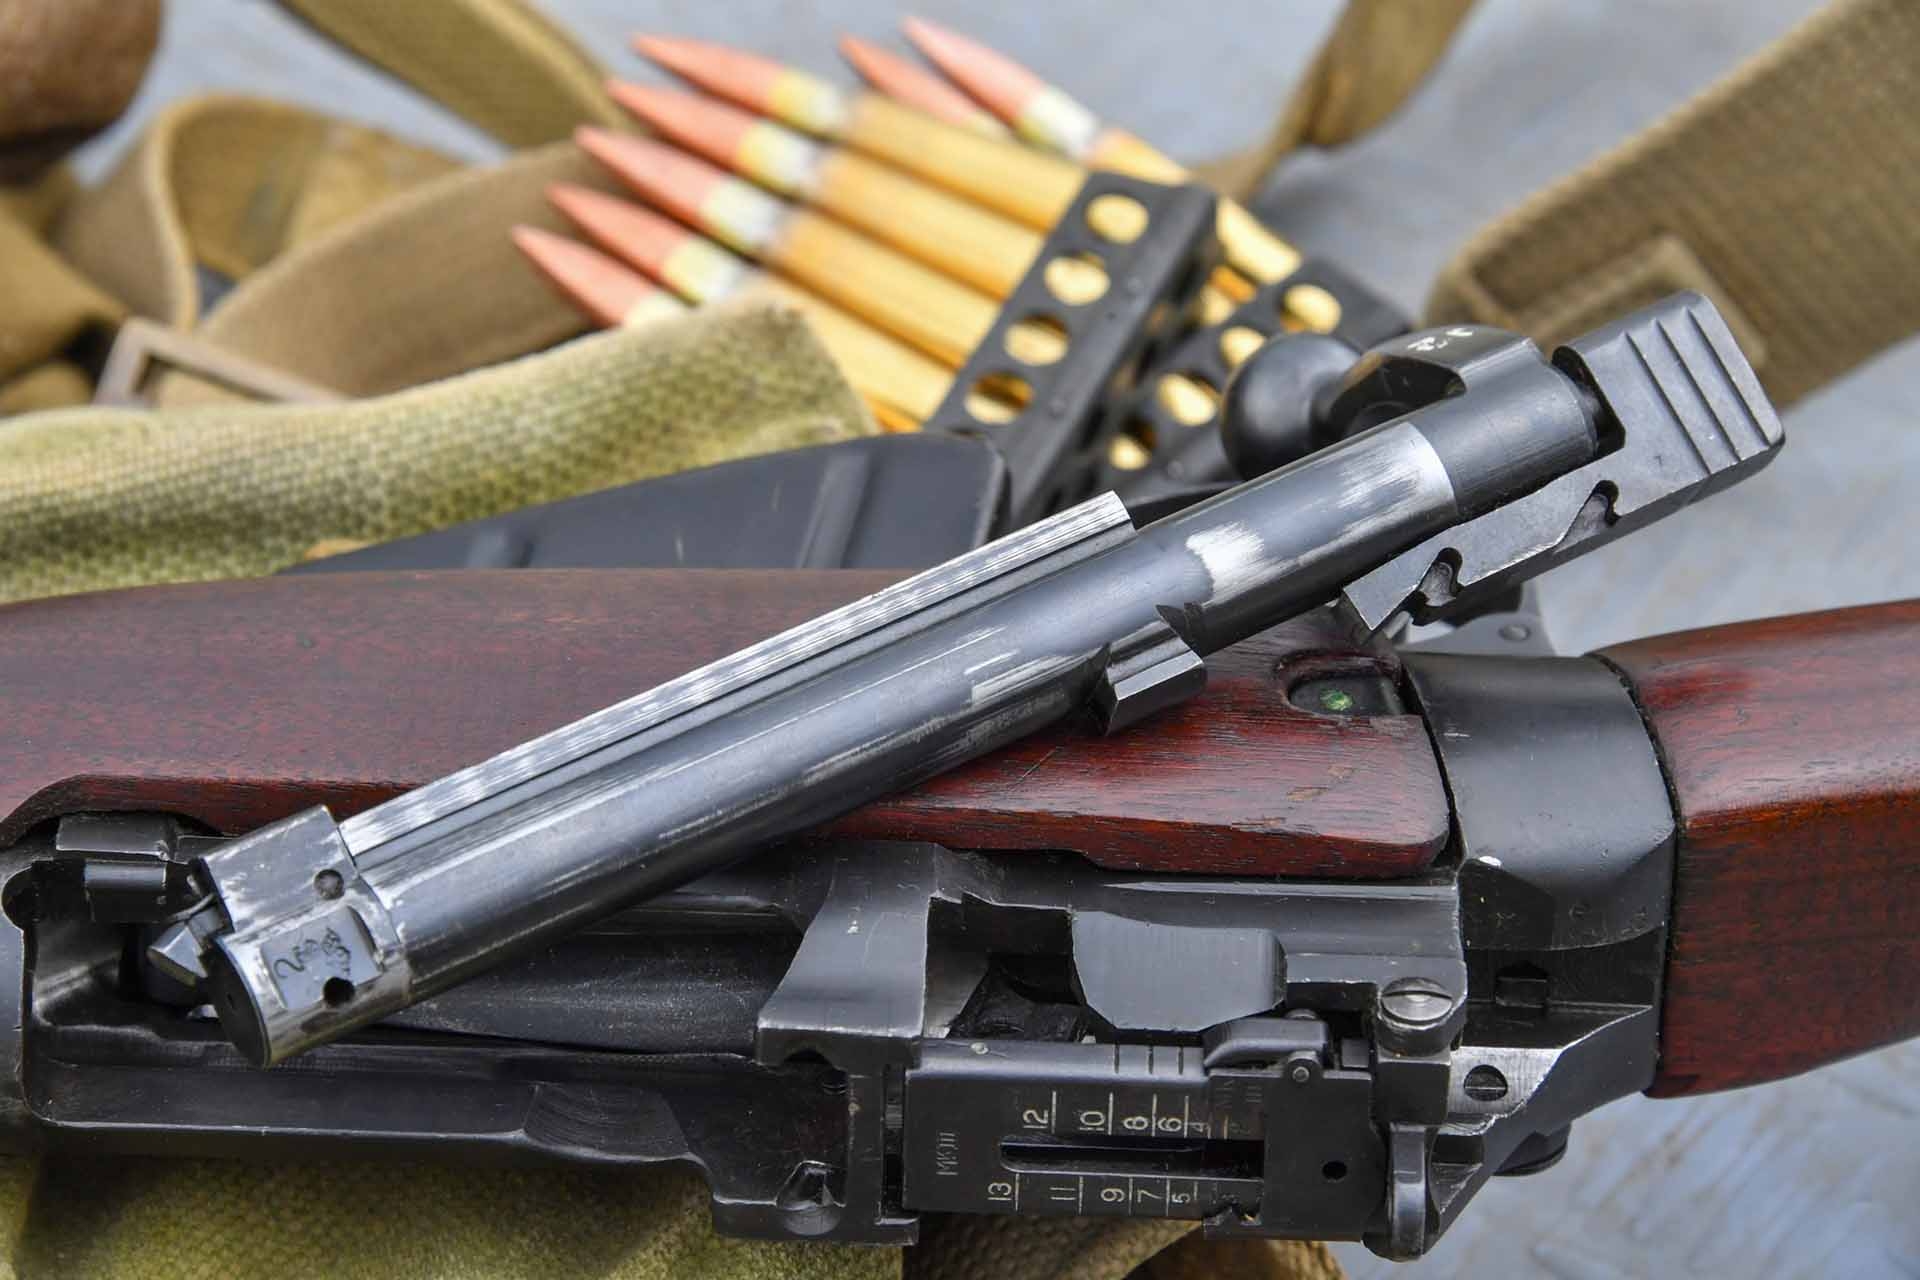 The Lee-Enfield , the “utilitarian” rifle | all4shooters